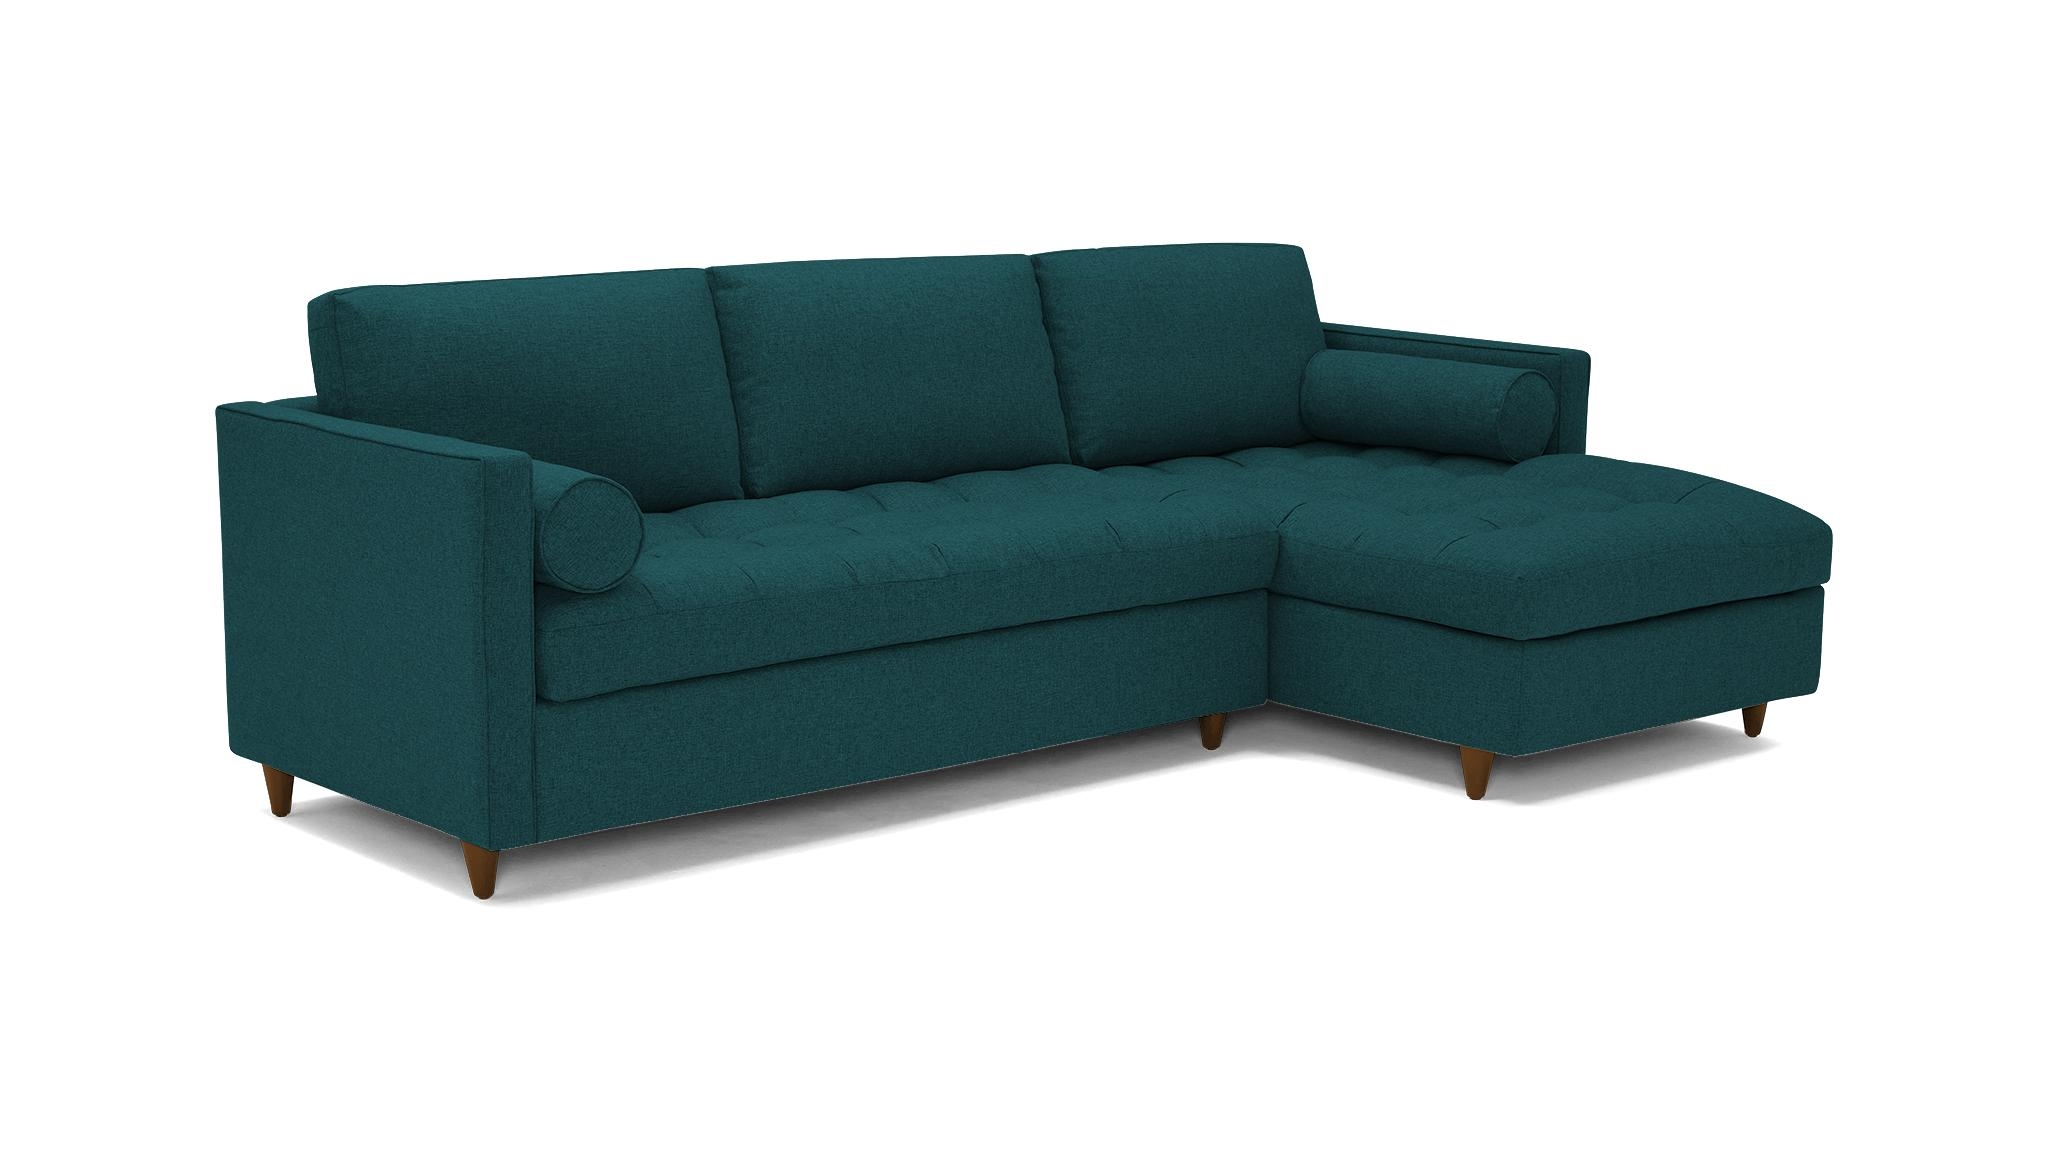 Blue Briar Mid Century Modern Sectional with Storage - Royale Peacock - Mocha - Left - Image 1